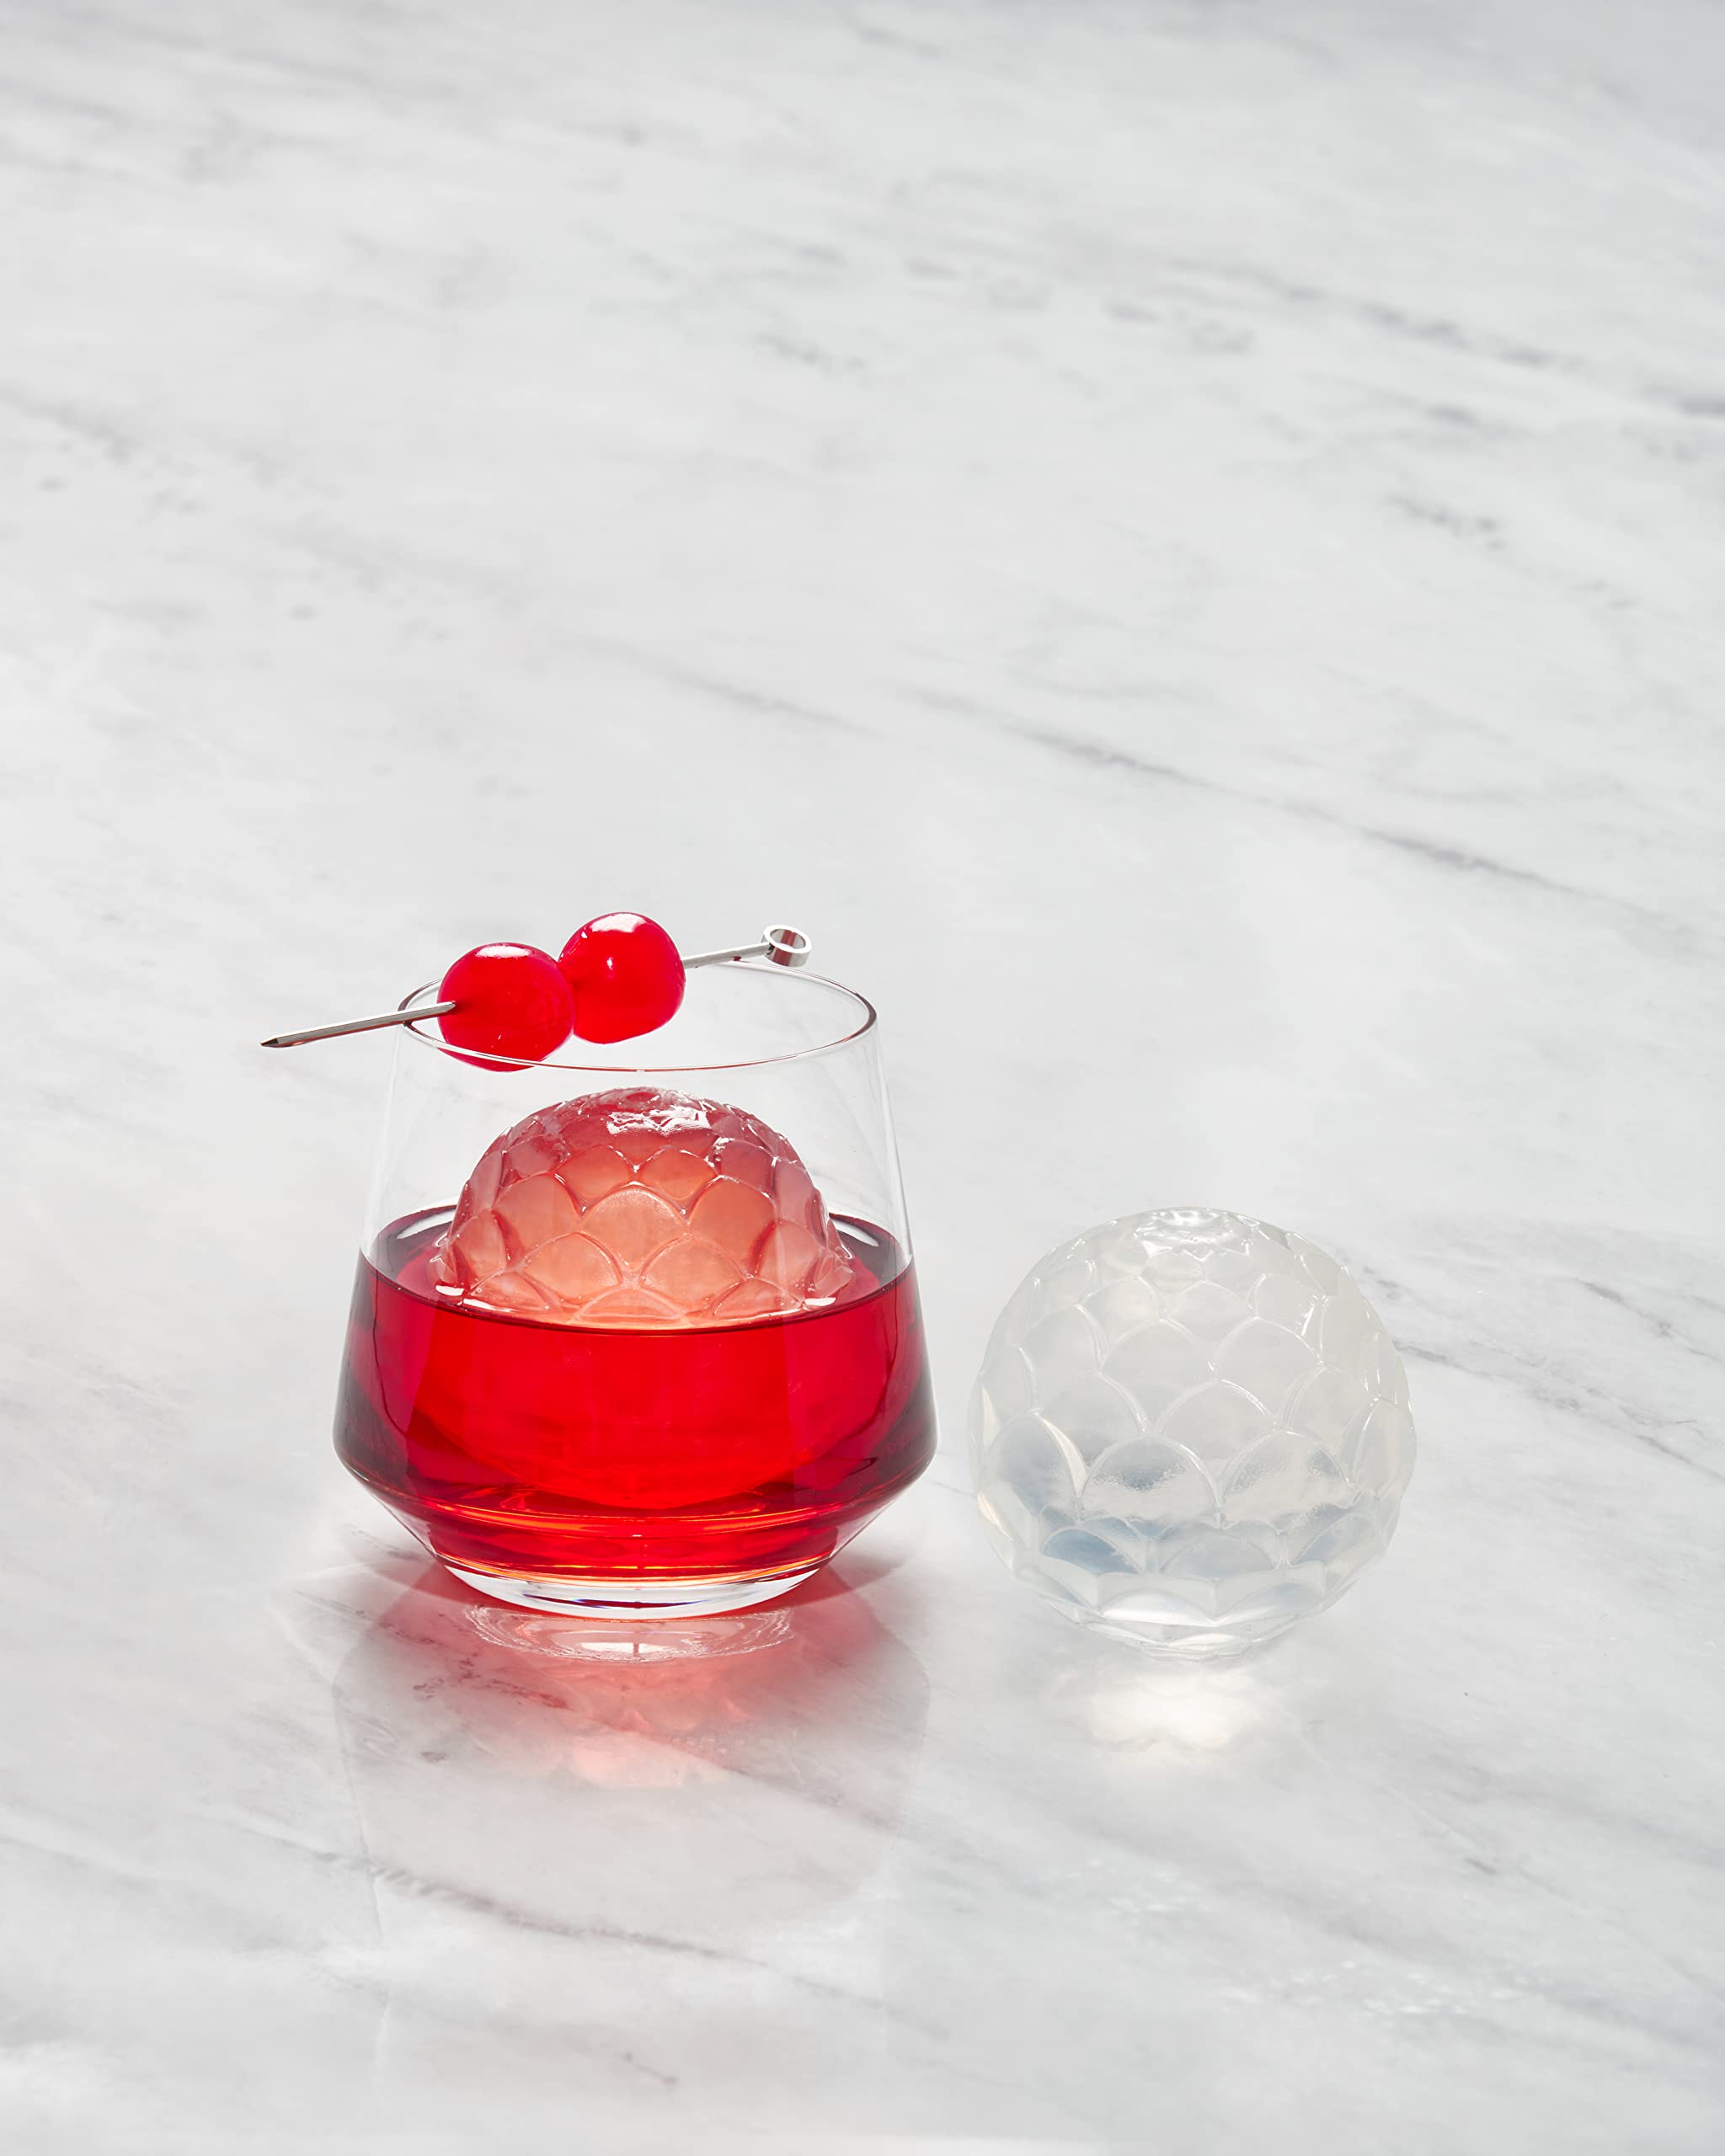 W&P Petal Ice Tray, Perfect Etched Spheres, Slow Melting for Whiskey and Cocktails, Food Grade Premium Silicone, Dishwasher Safe, BPA Free